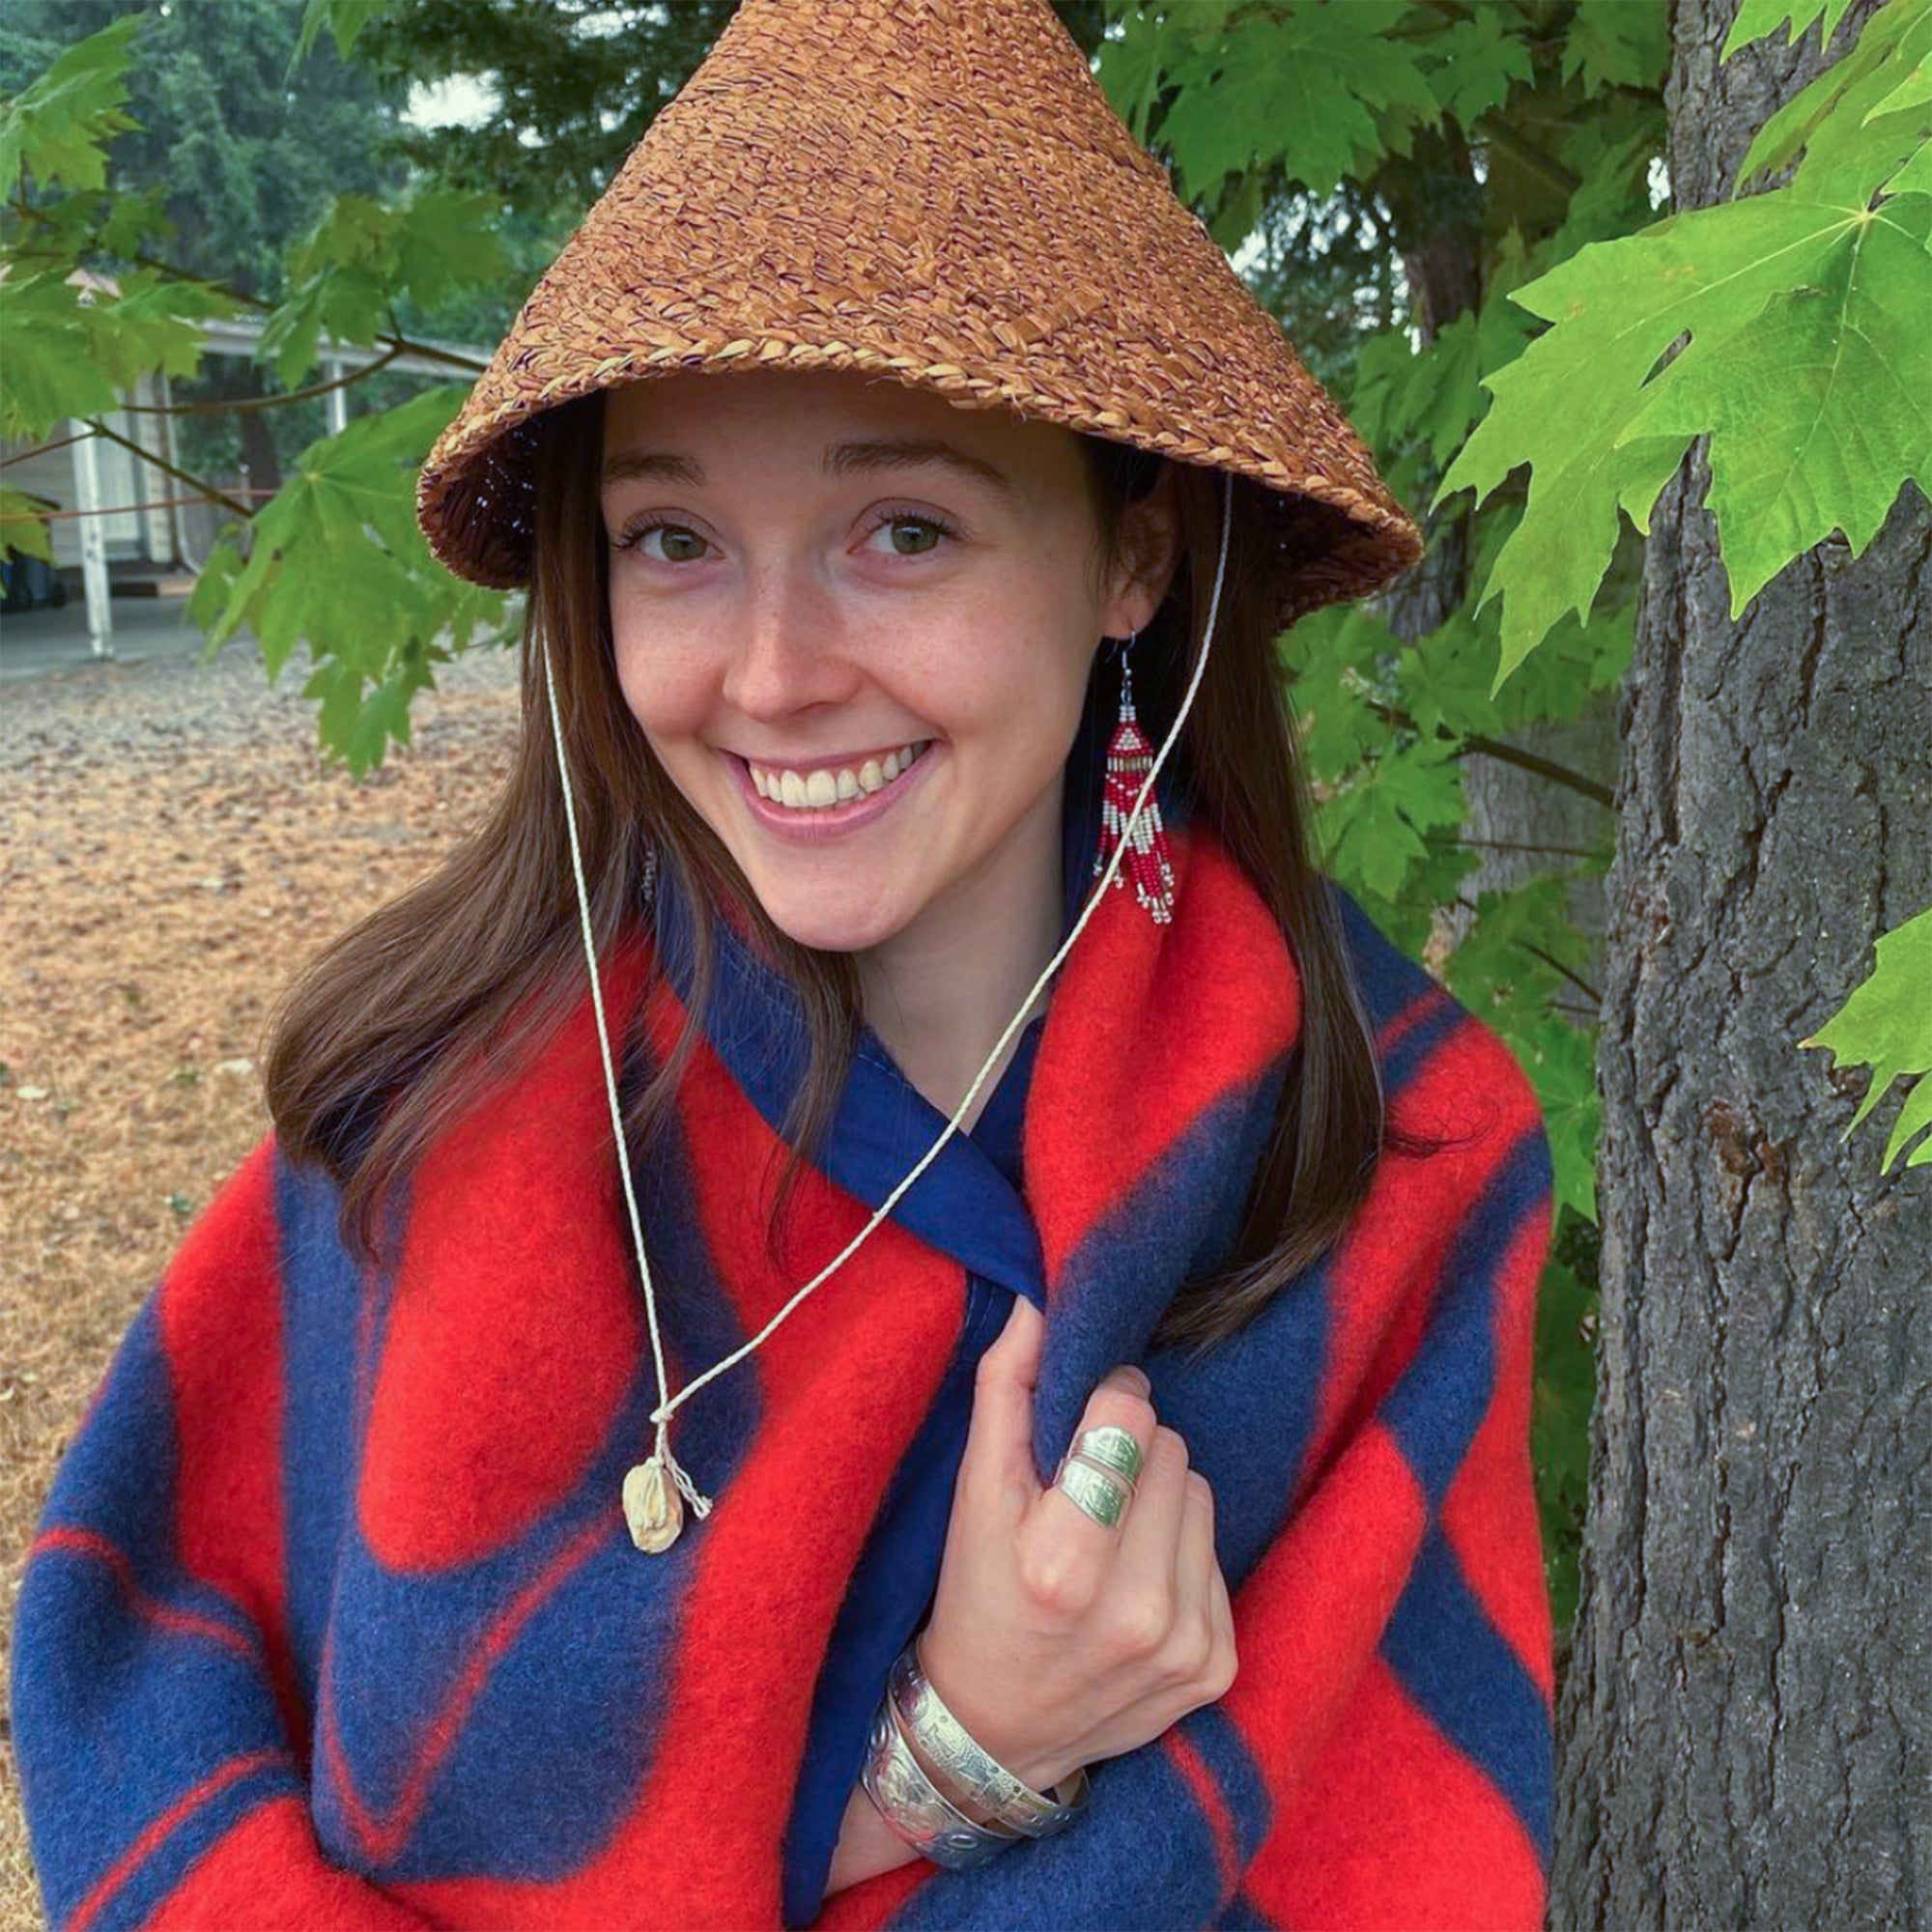 A-woman-with-a-cedar-hat-smiles-and-stands-wrapped-in-a-red-and-blue-wool-blanket-with-Northwest-Coast-designs.